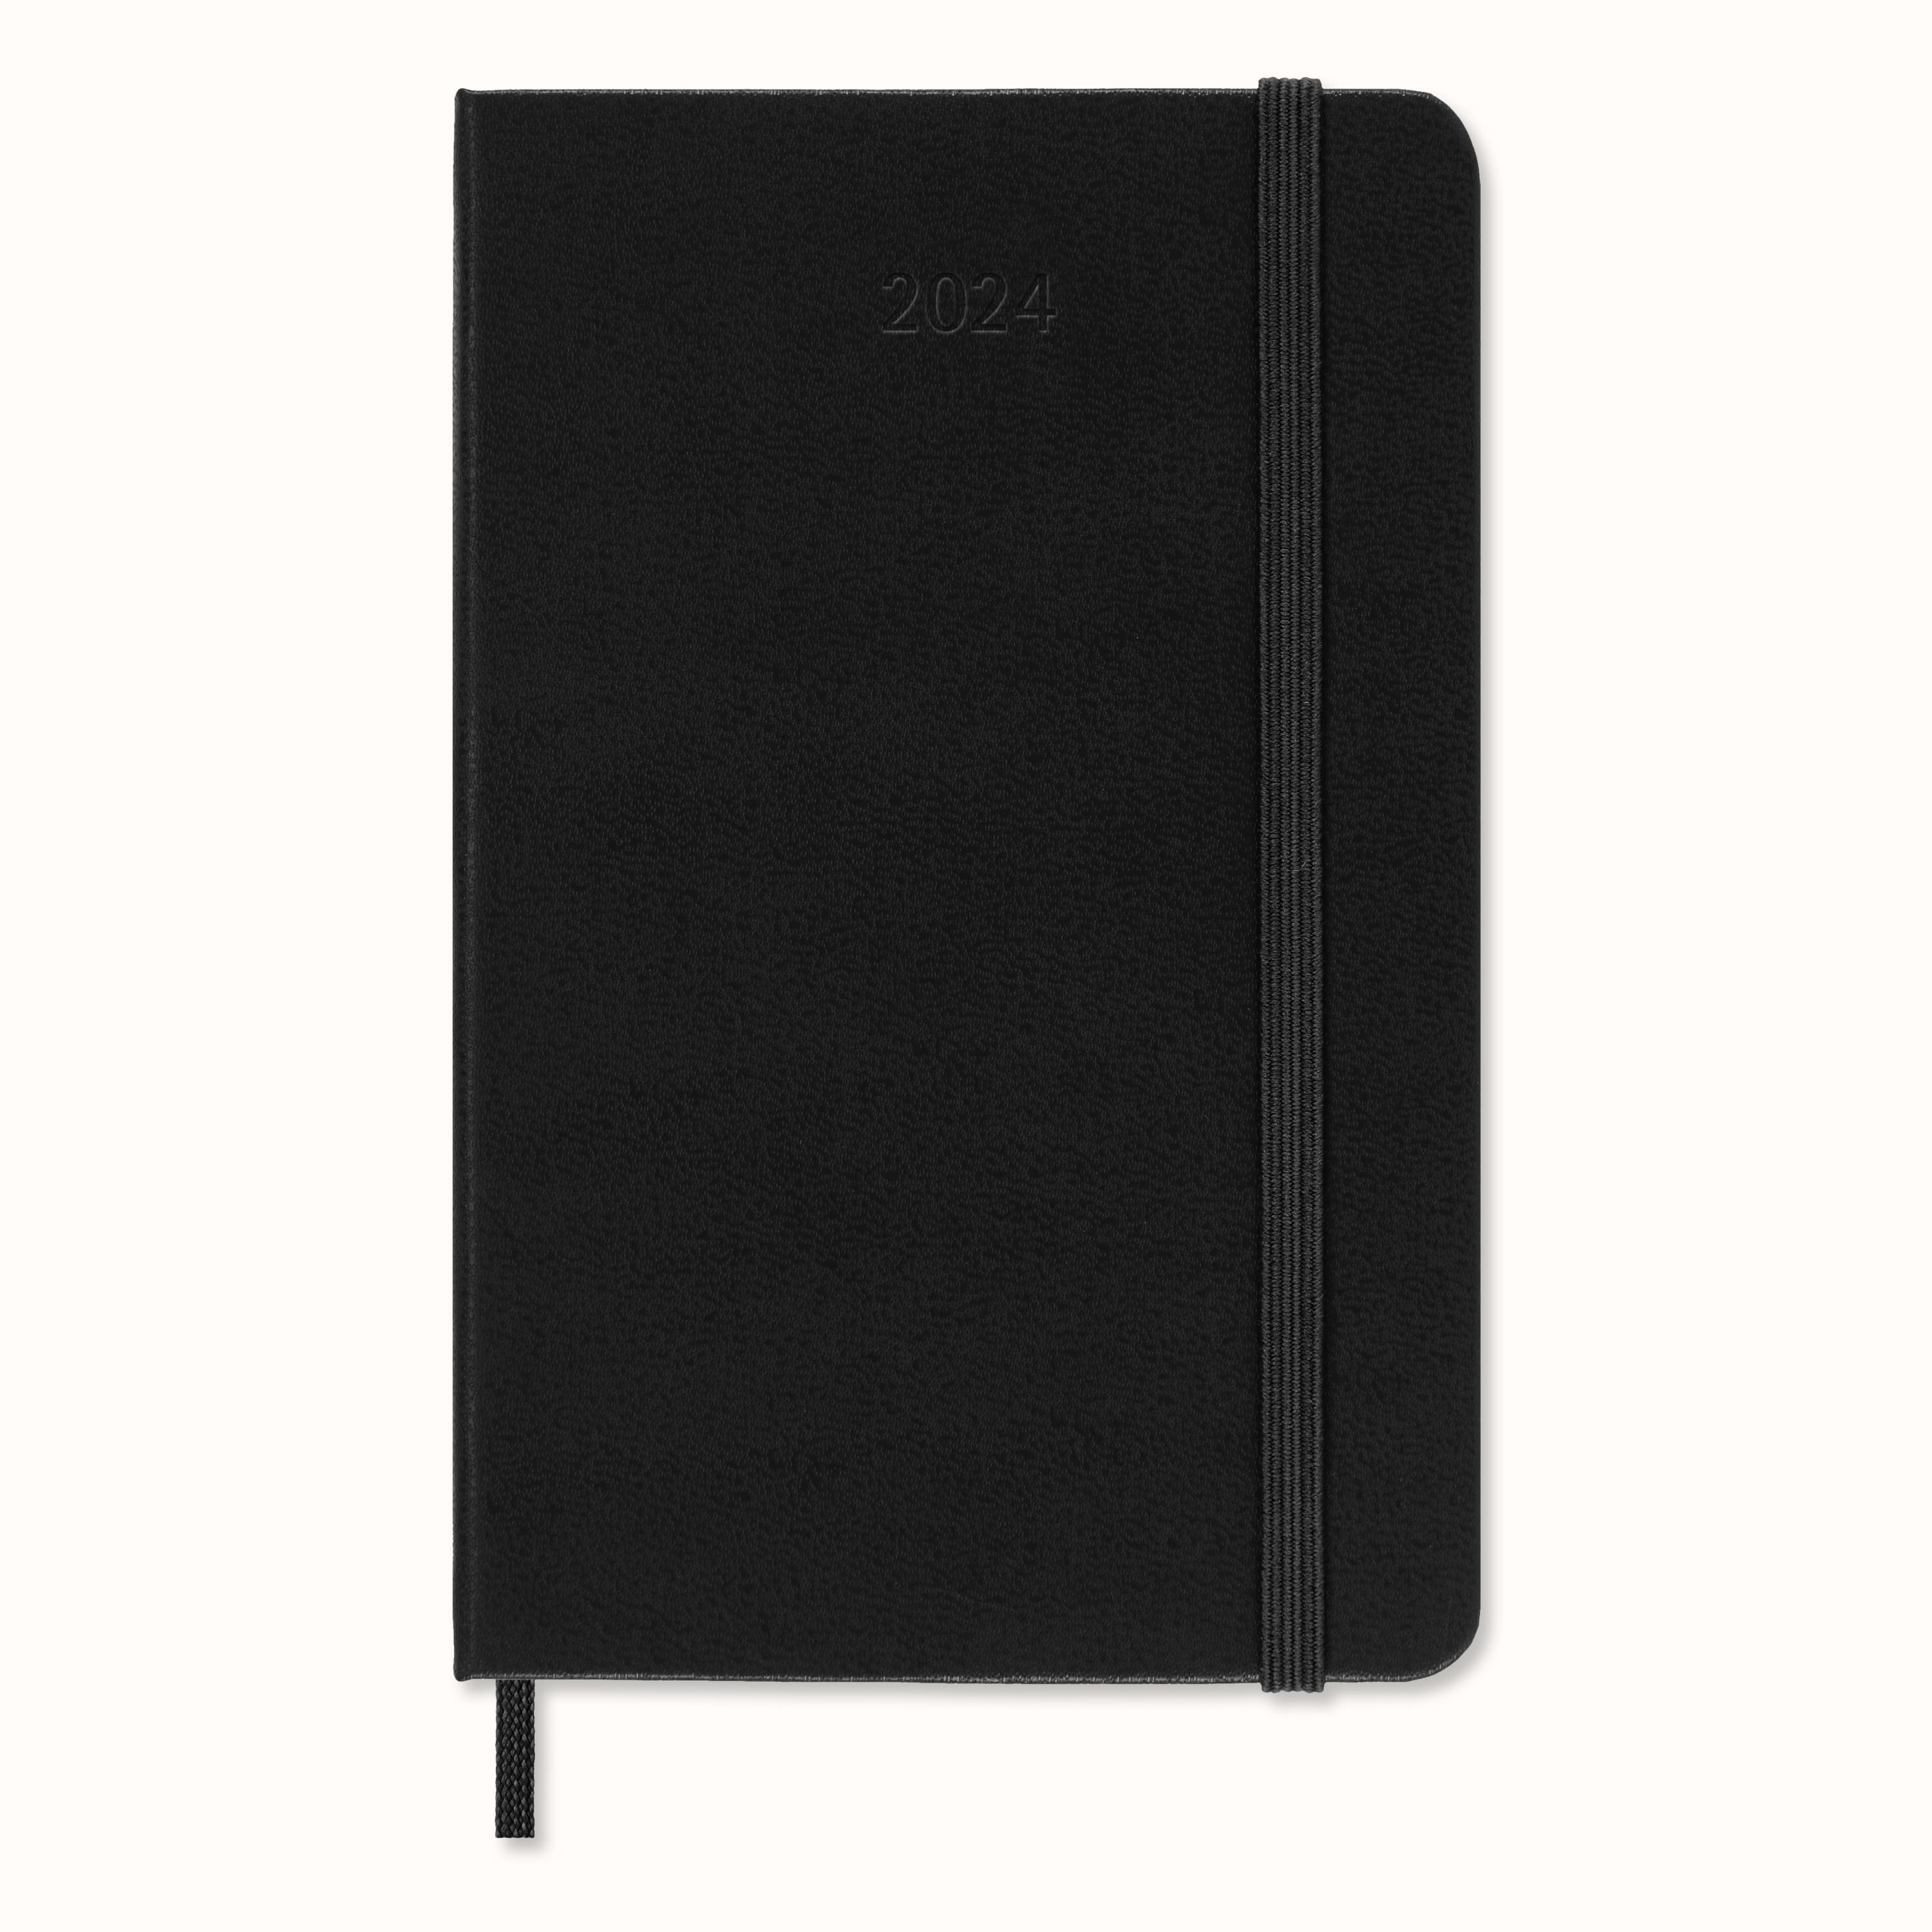 Classic Planner 2024 Pocket Daily, hard cover, 12 months Black